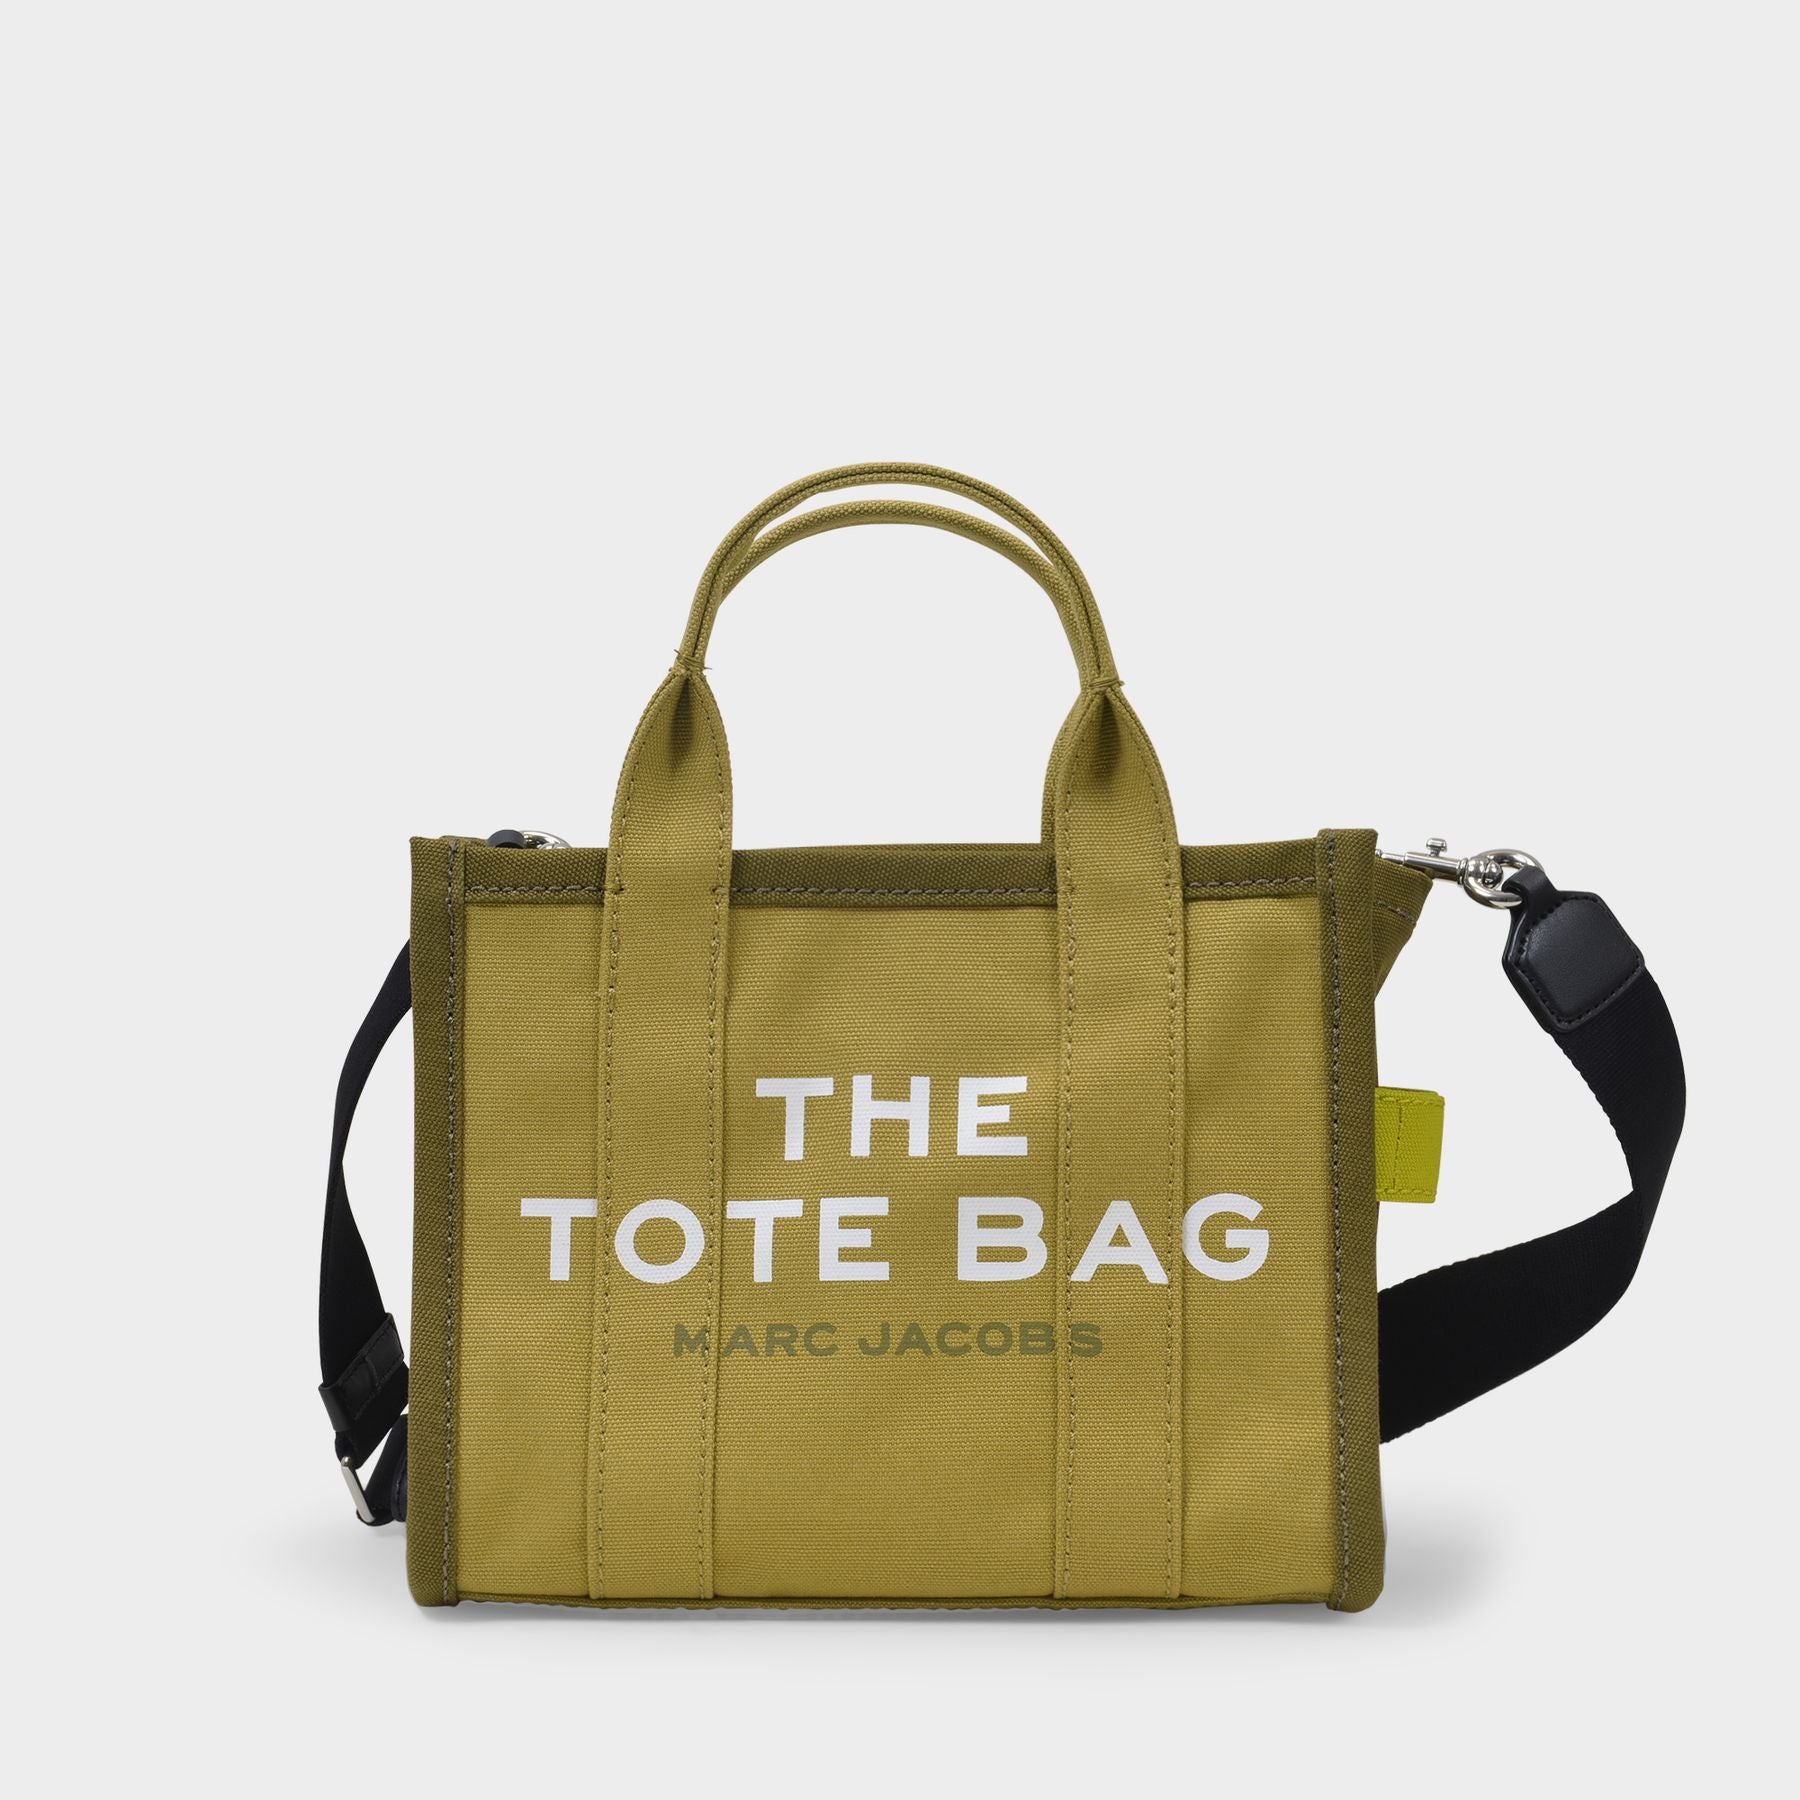 Marc Jacobs - THE MINI TOTE BAG in Slate Green. This item is part